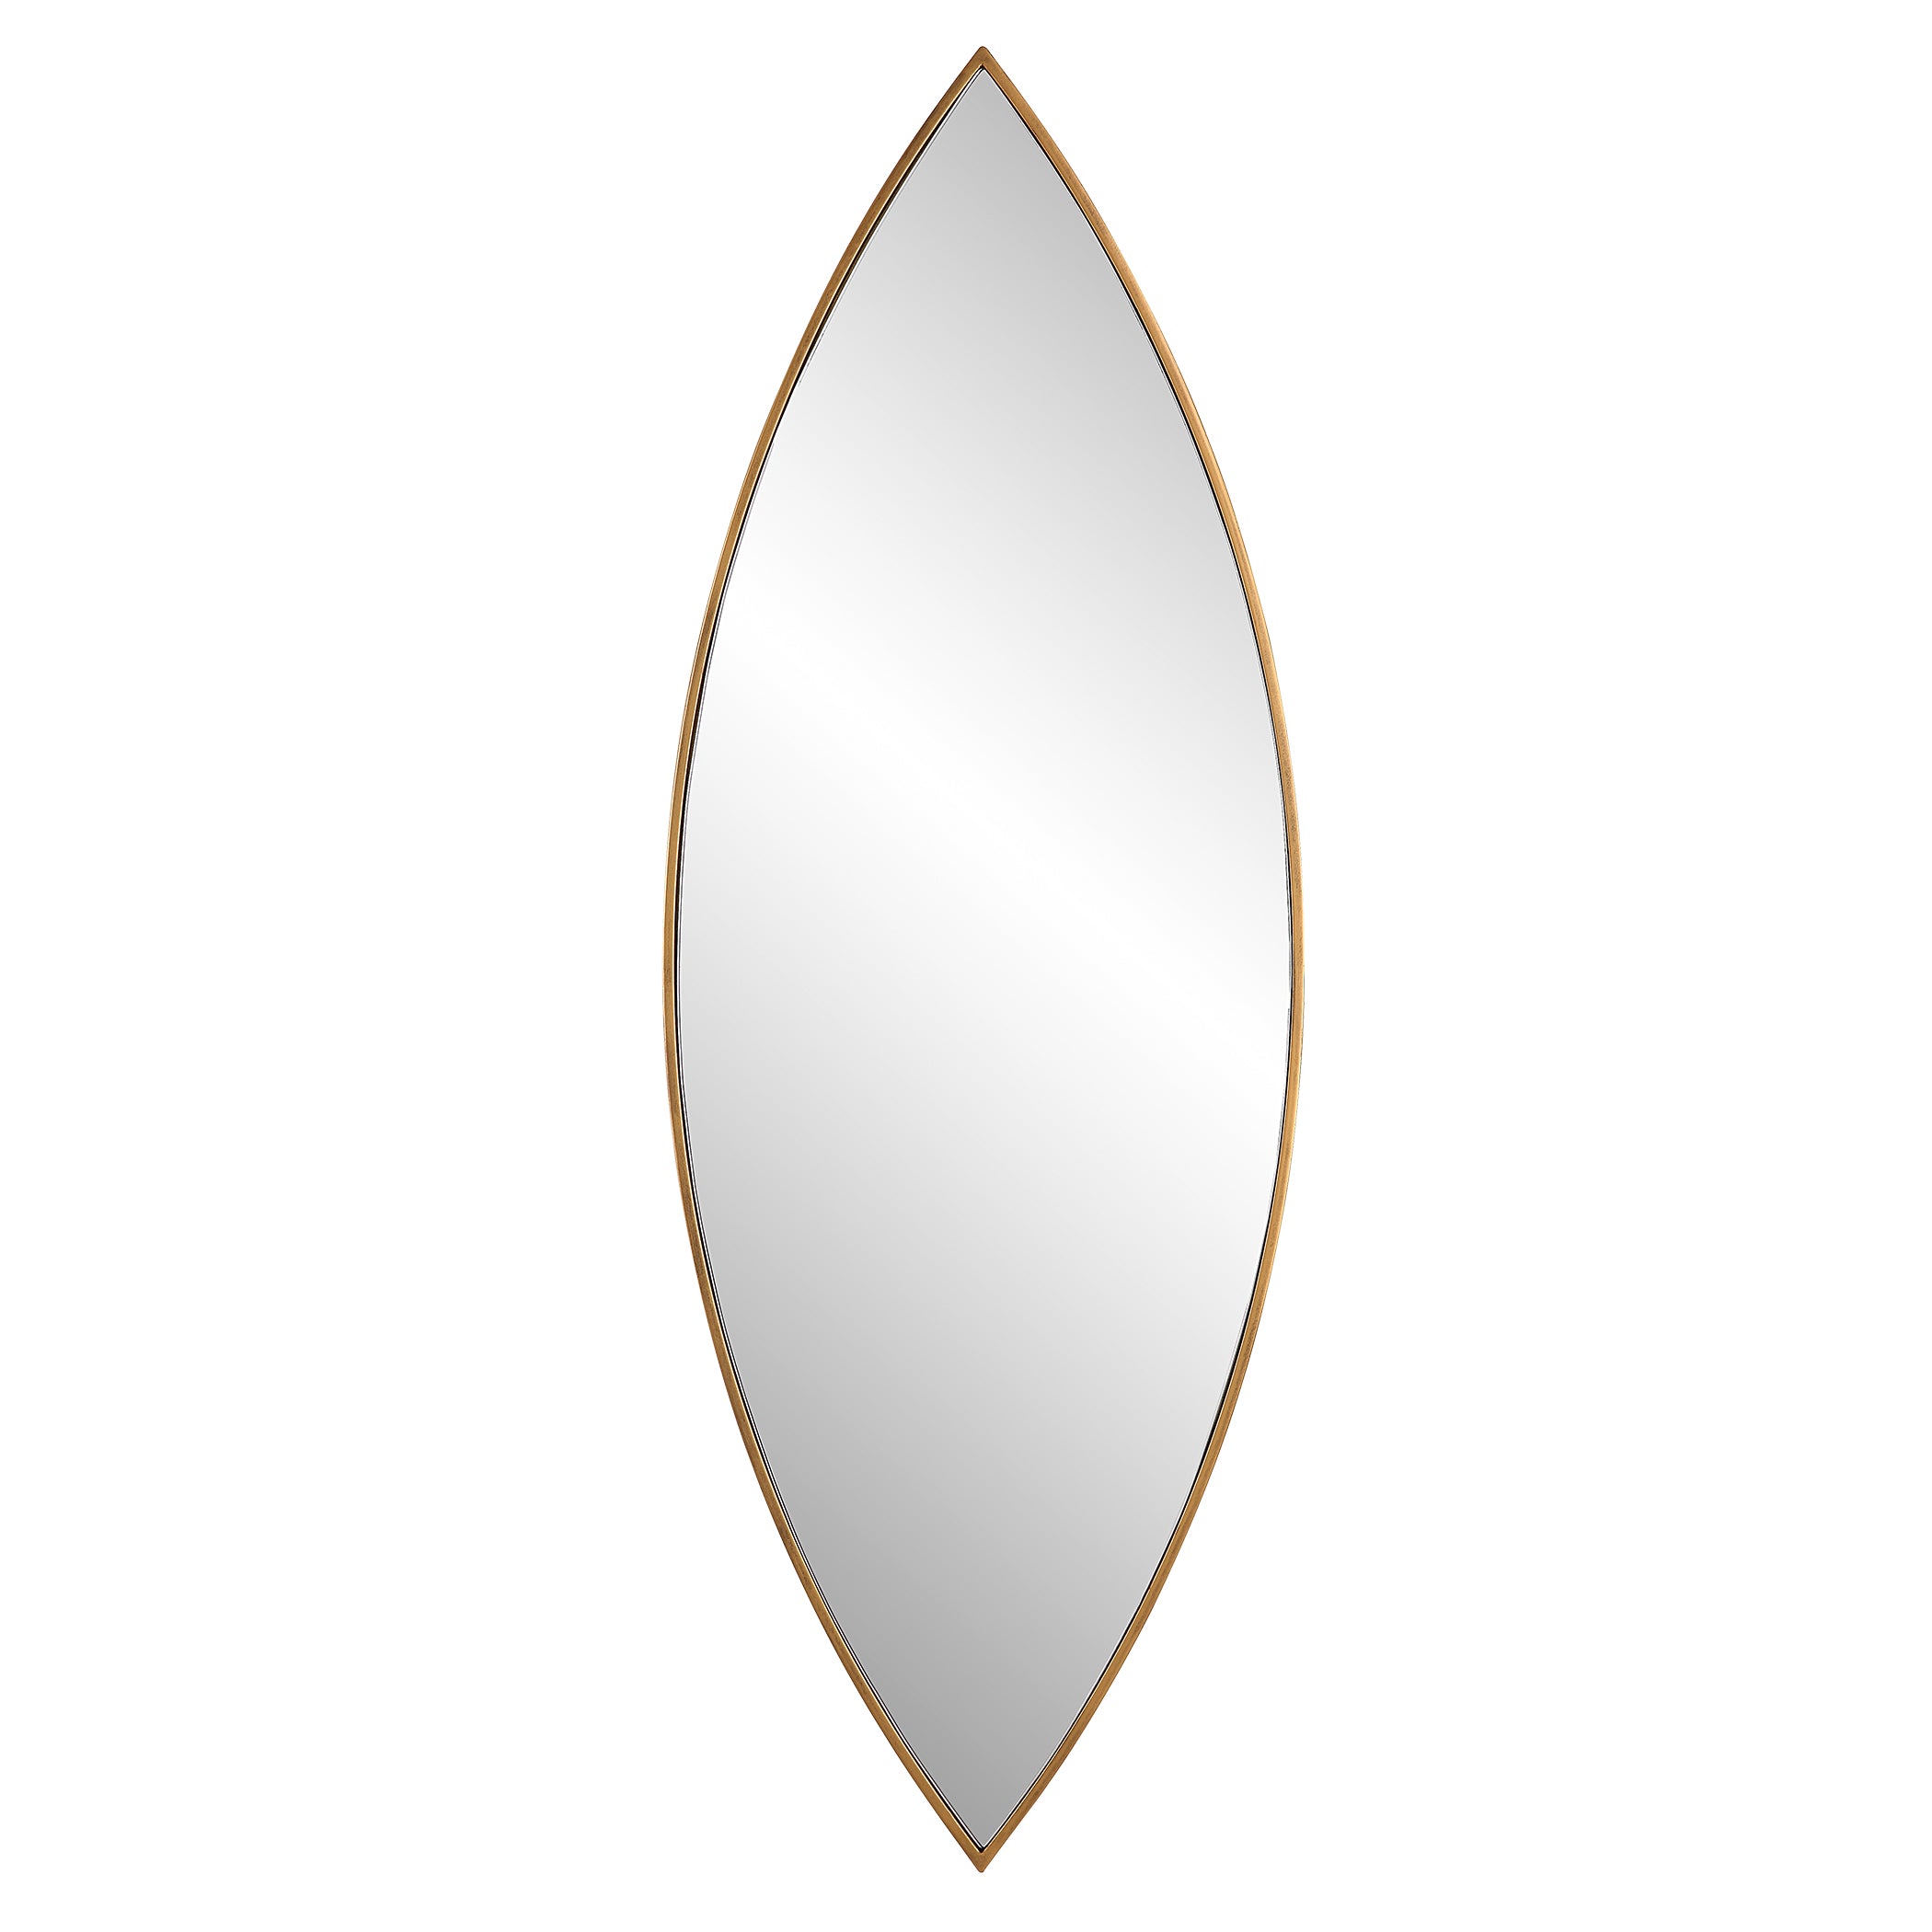 Round Accent Wall Mirror with Scalloped Design and Beveled Edges, Silver